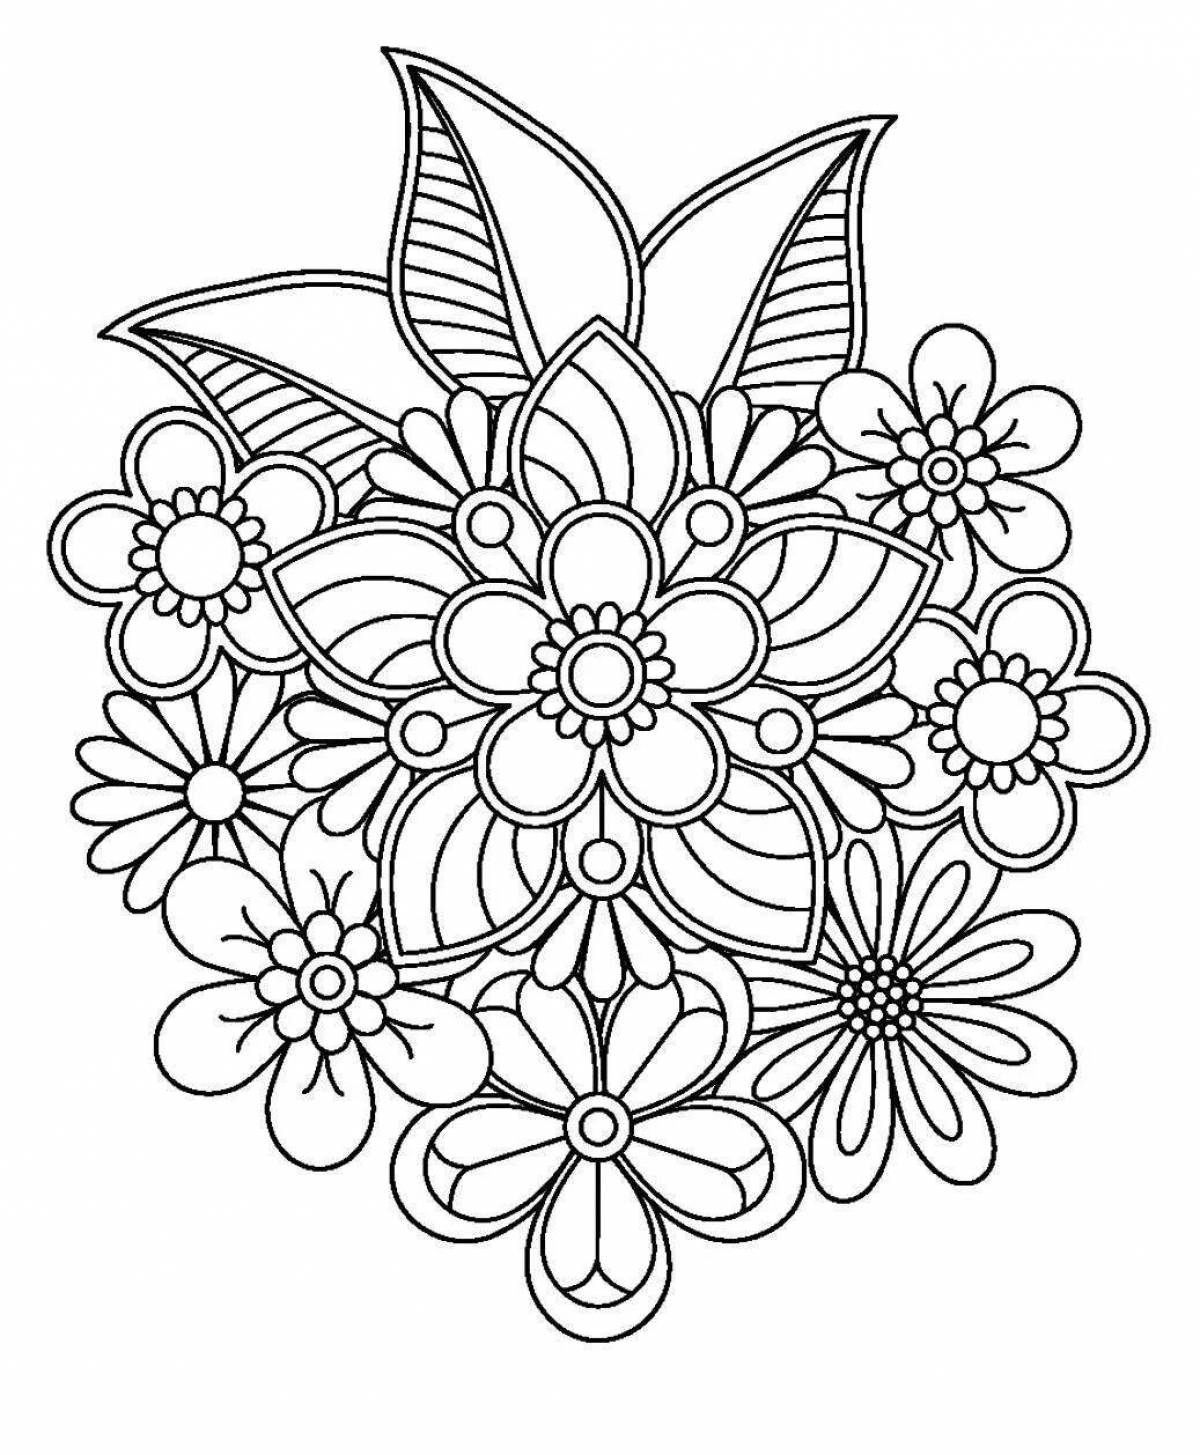 Glowing light pattern coloring page